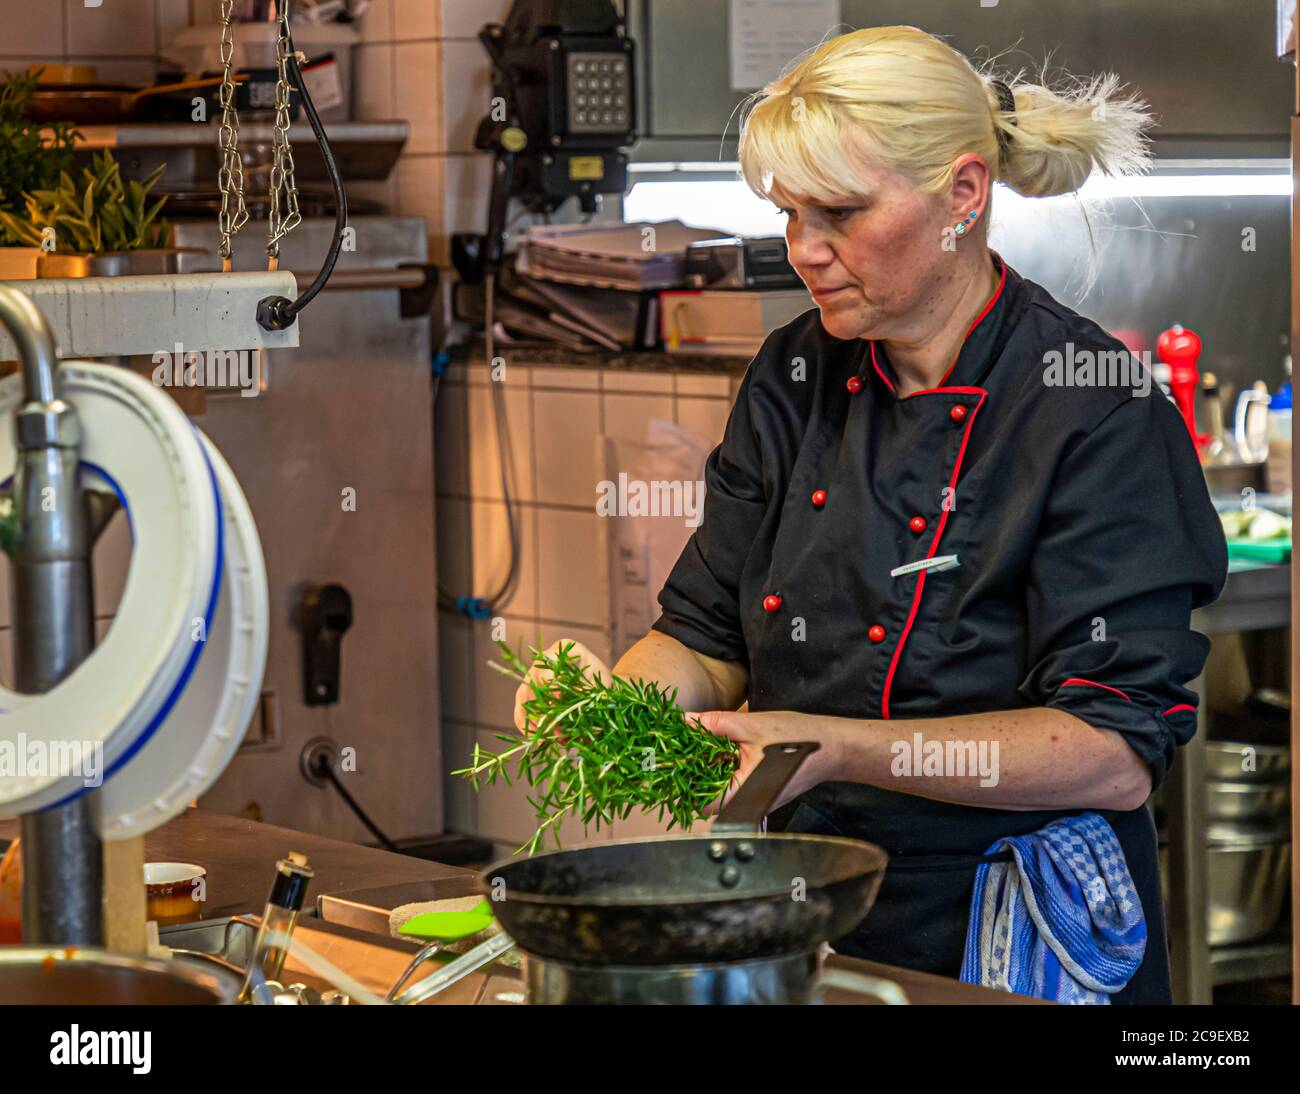 It brings Apulian cuisine to the table according to recipes also from Fabio Elia's grandmother. Chef Annette Heitzmann uses only sustainable products. Kitchen of Hotel Mühle in Binzen, Germany Stock Photo